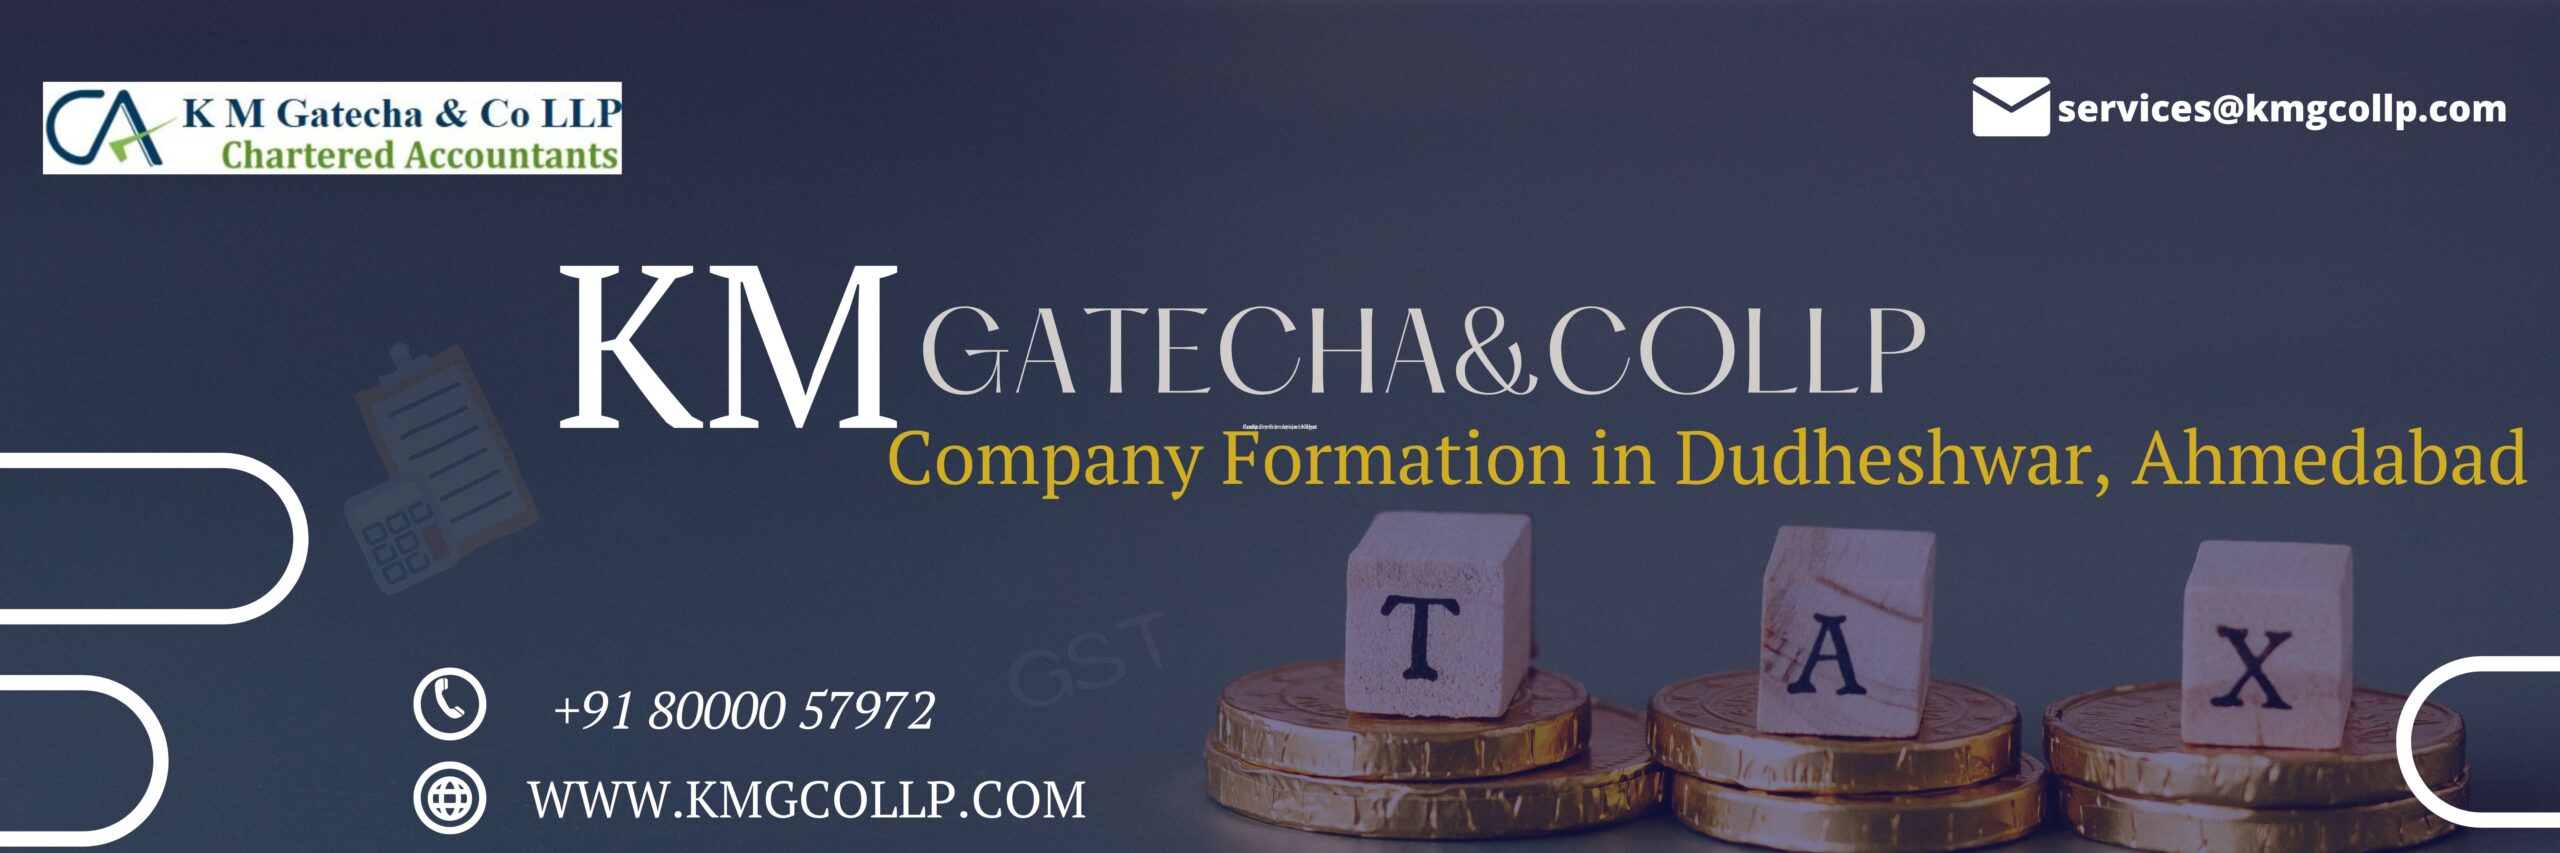 Company Formation in Dudheshwar